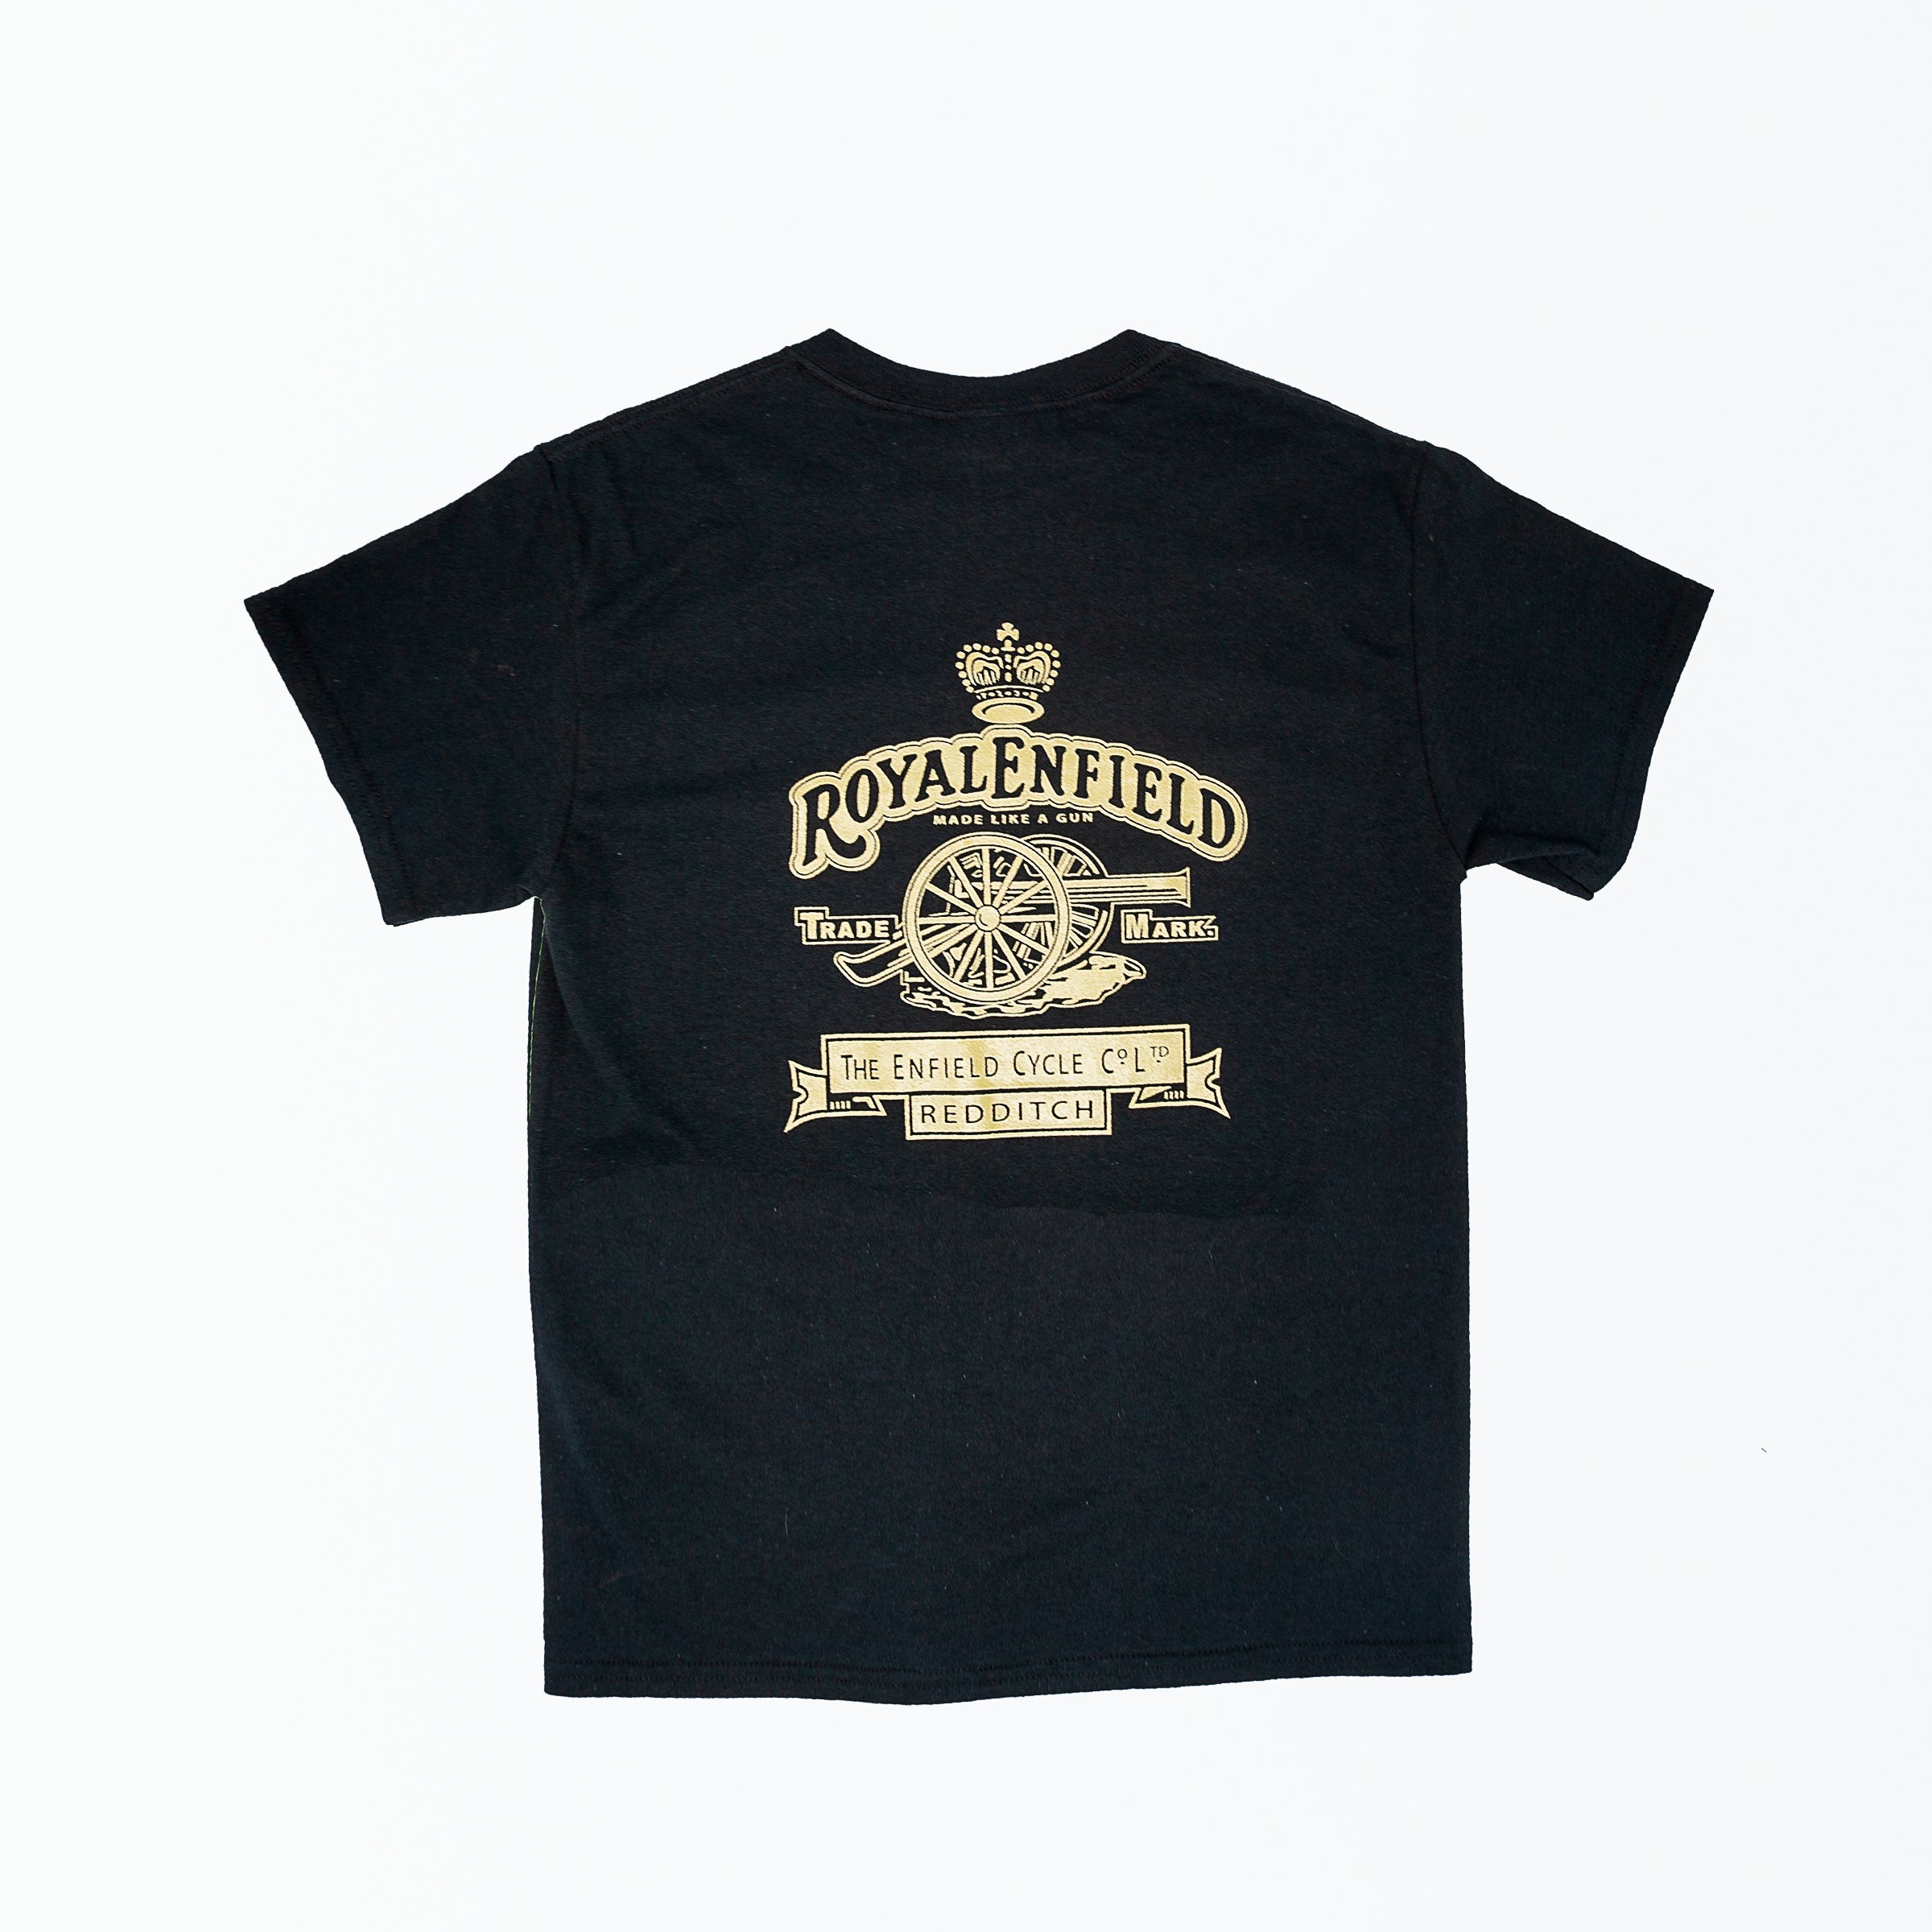 Dreamcycle Motorcycle Museum |  Back of black tshirt on a white background with text "Royal Enfield"